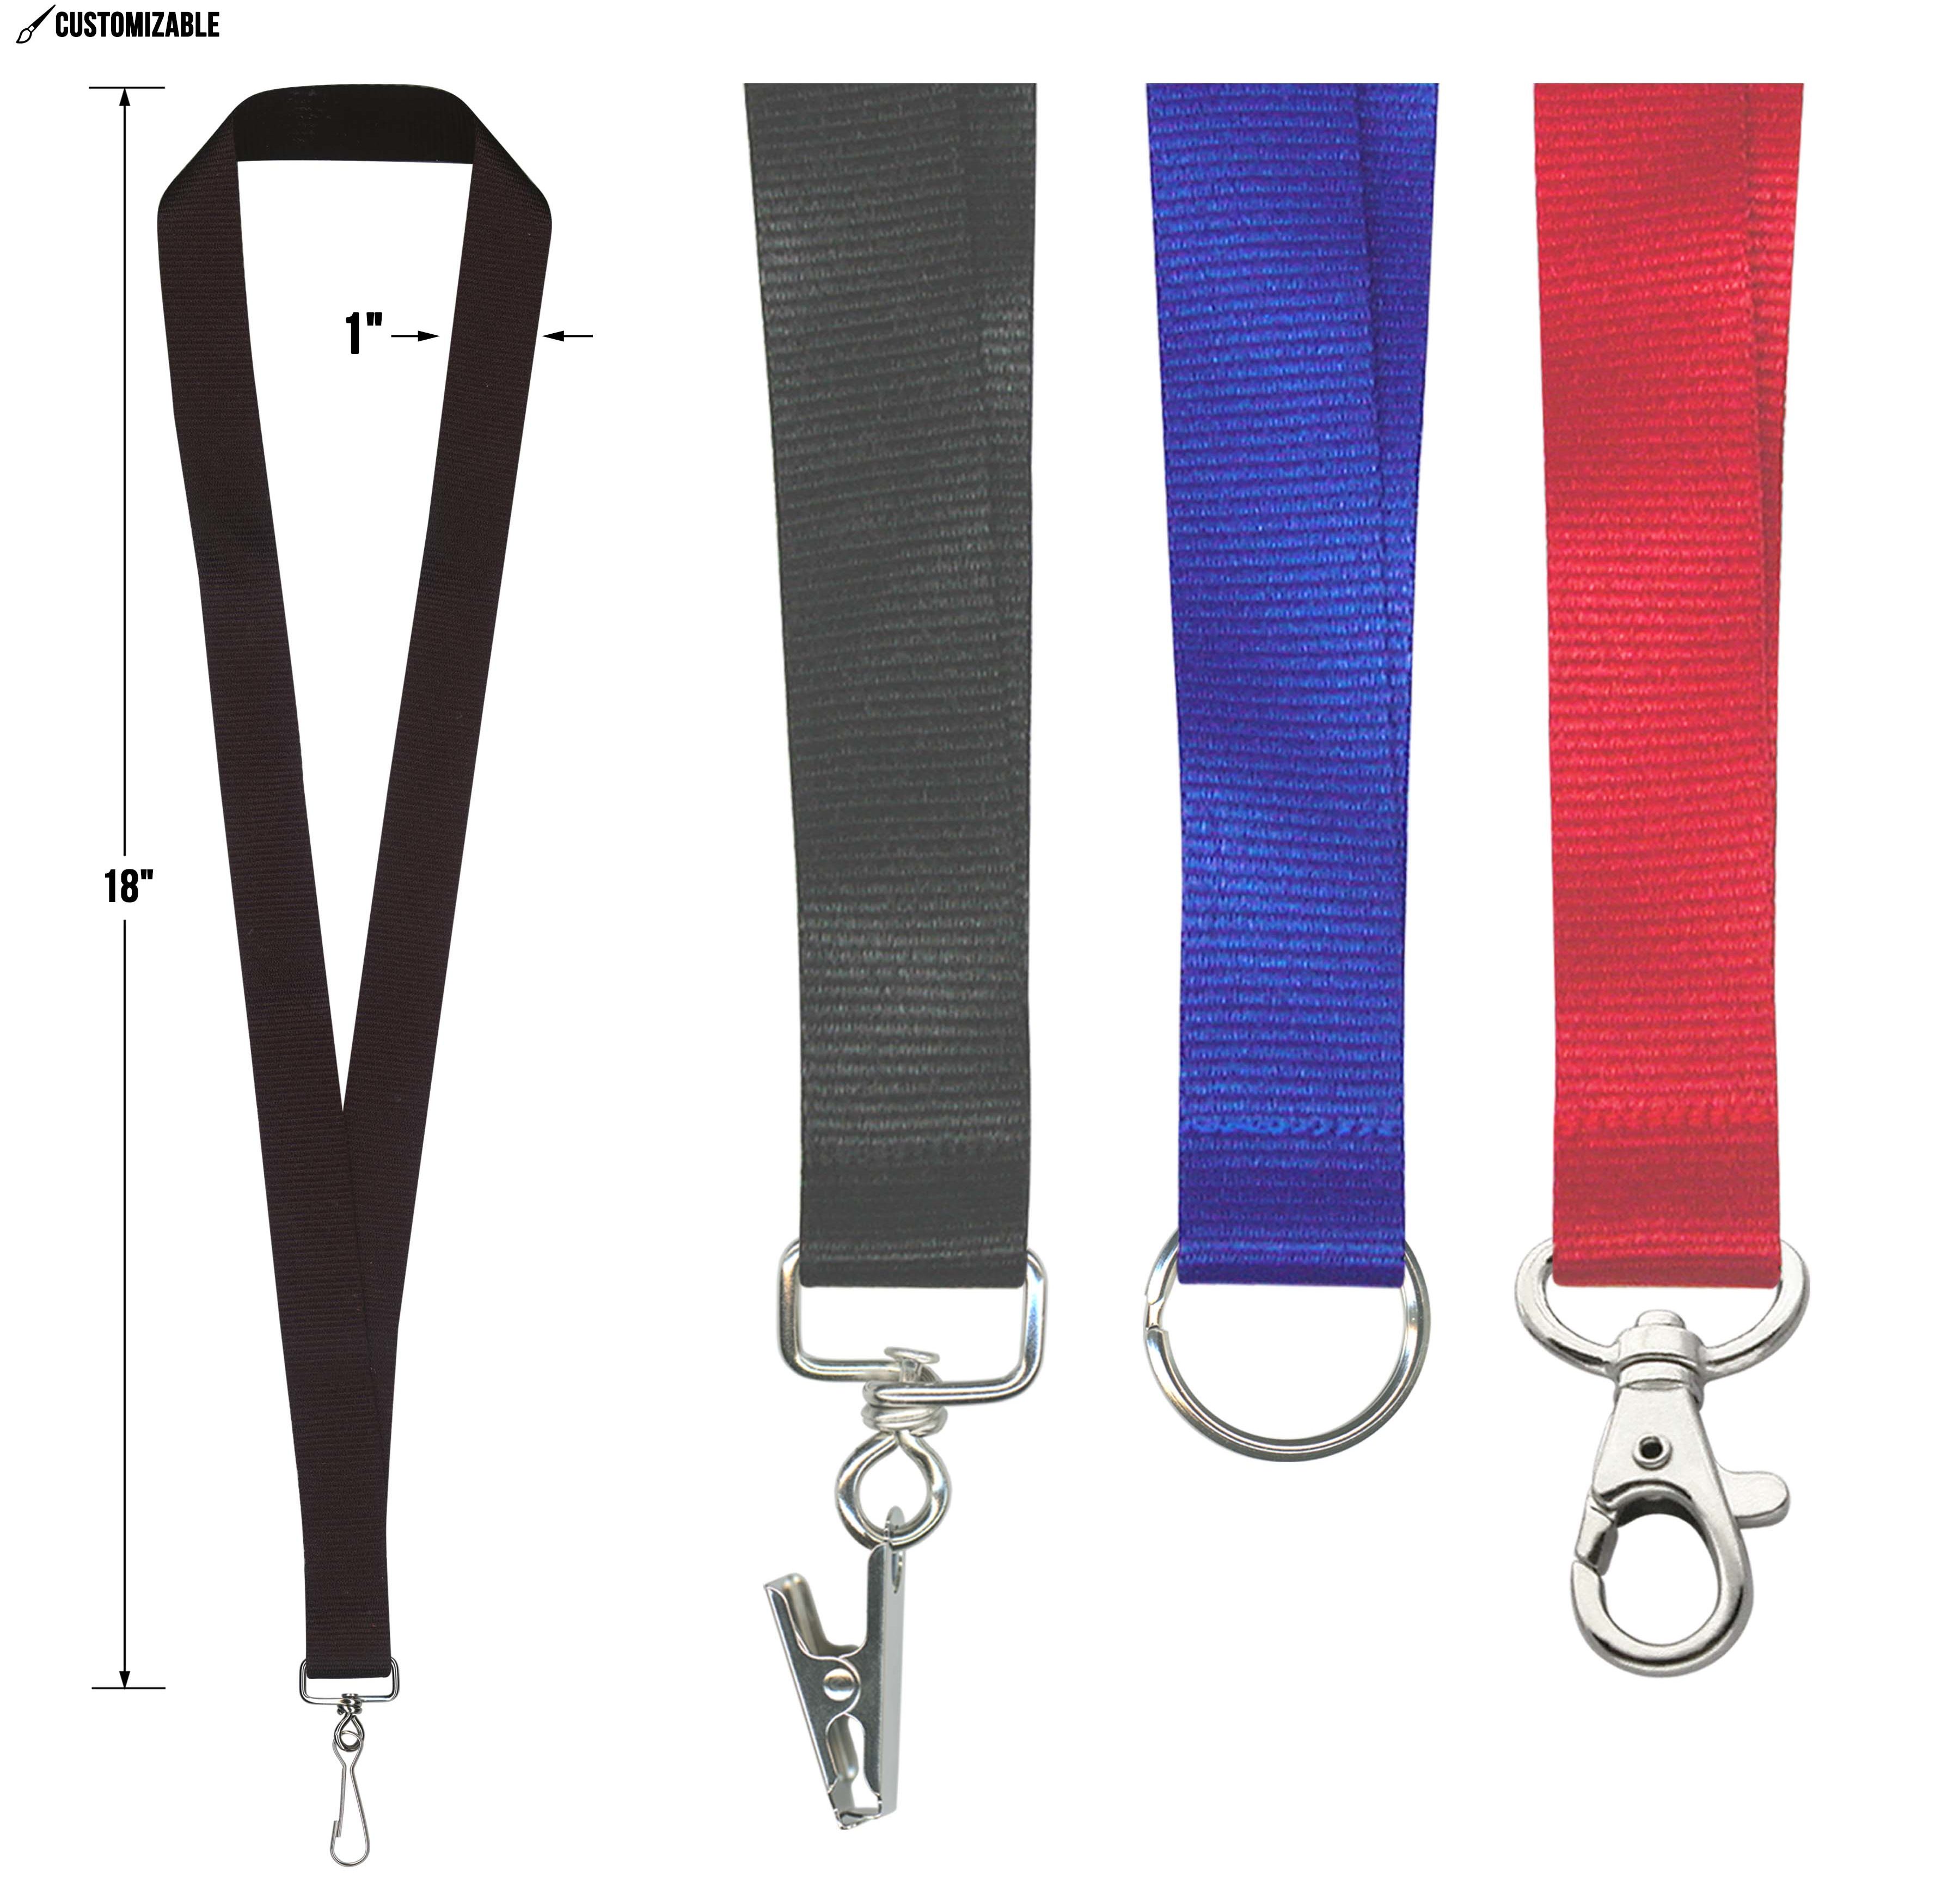 Customizable 1" Solid Color Lanyards - Choose from 14 Colors & 4 Hardware Attachments